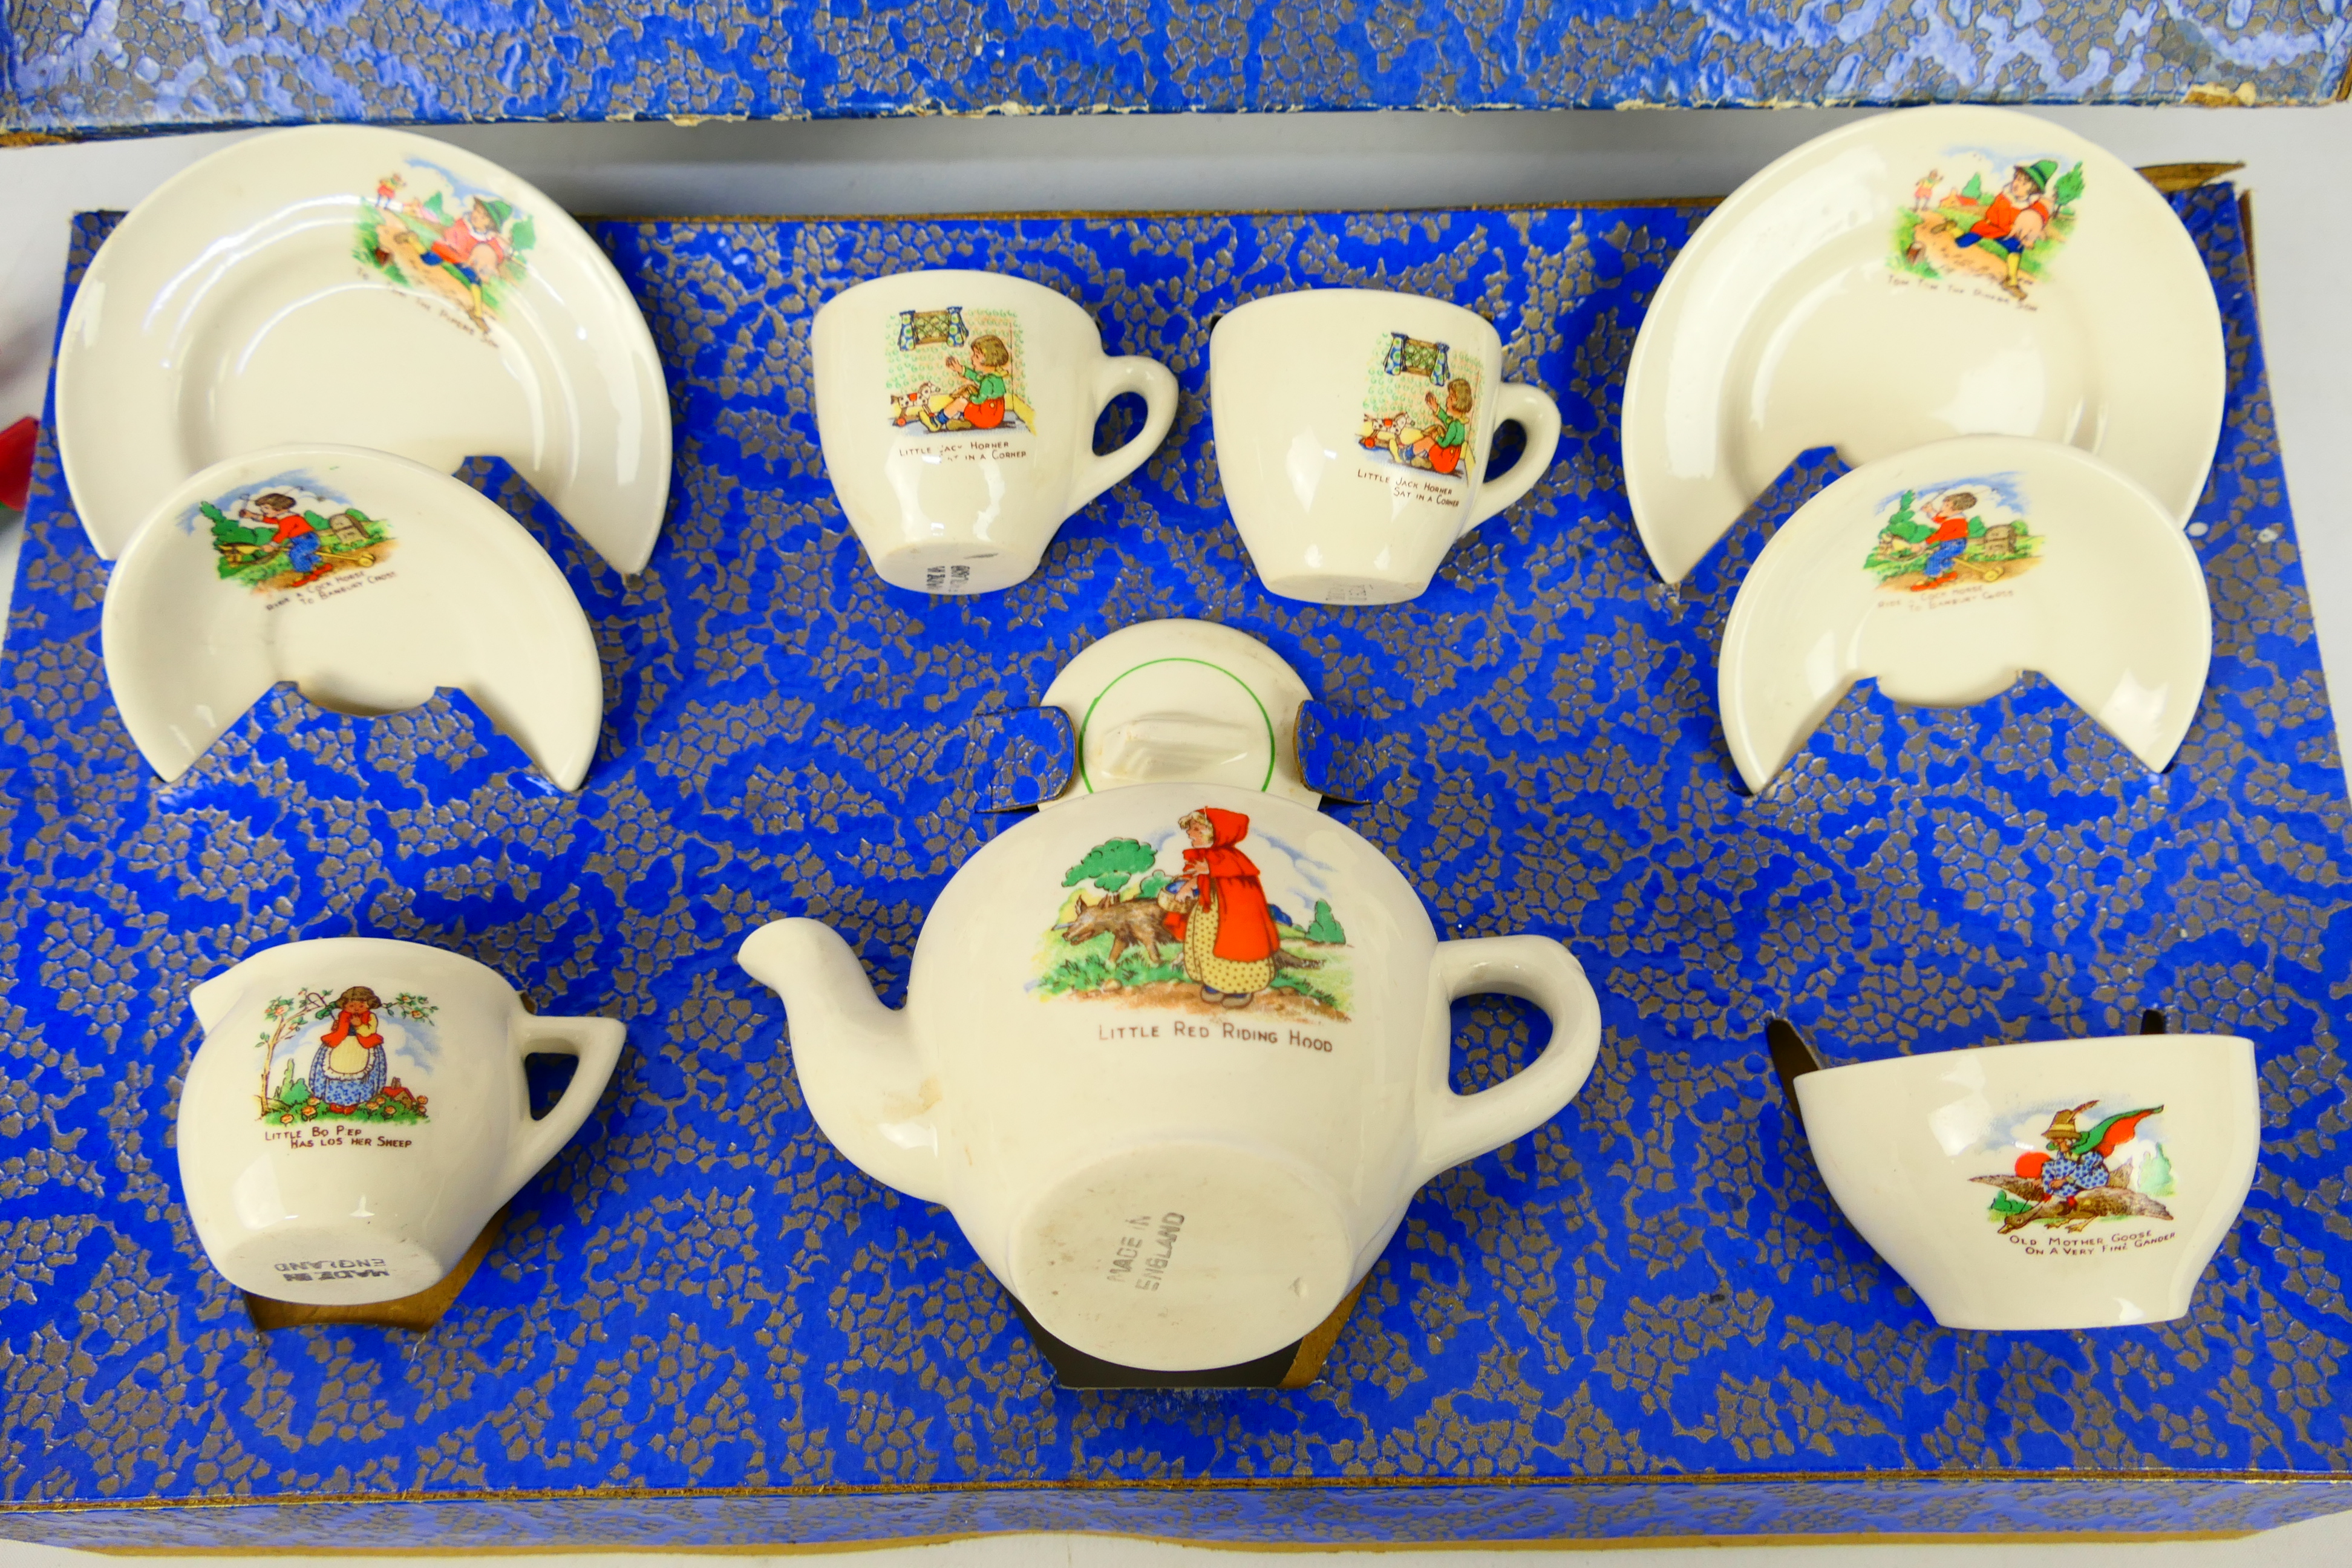 Amersham - A 1950s Amersham tea set decorated with printed nursery rhymes in excellent condition - Image 3 of 3